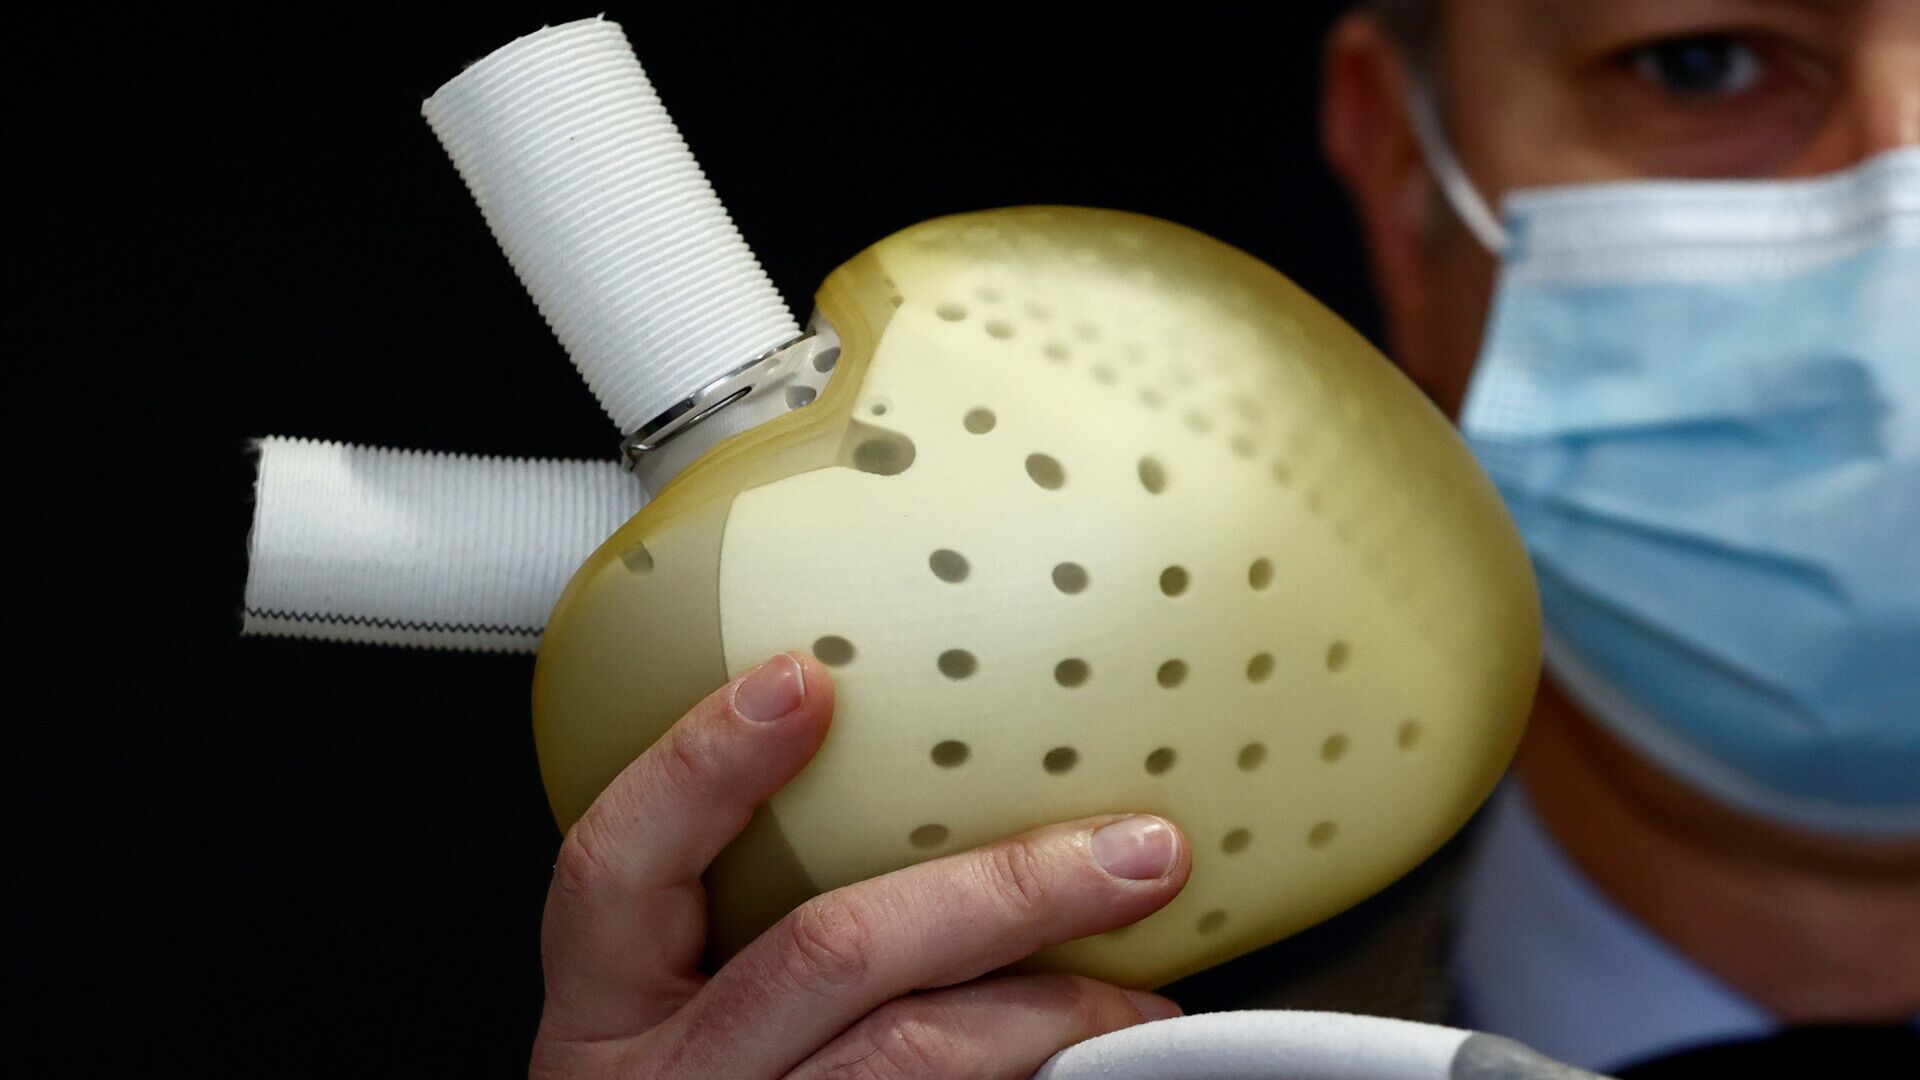 Artificial heart: the Aeson bioprosthesis from the French company Carmat